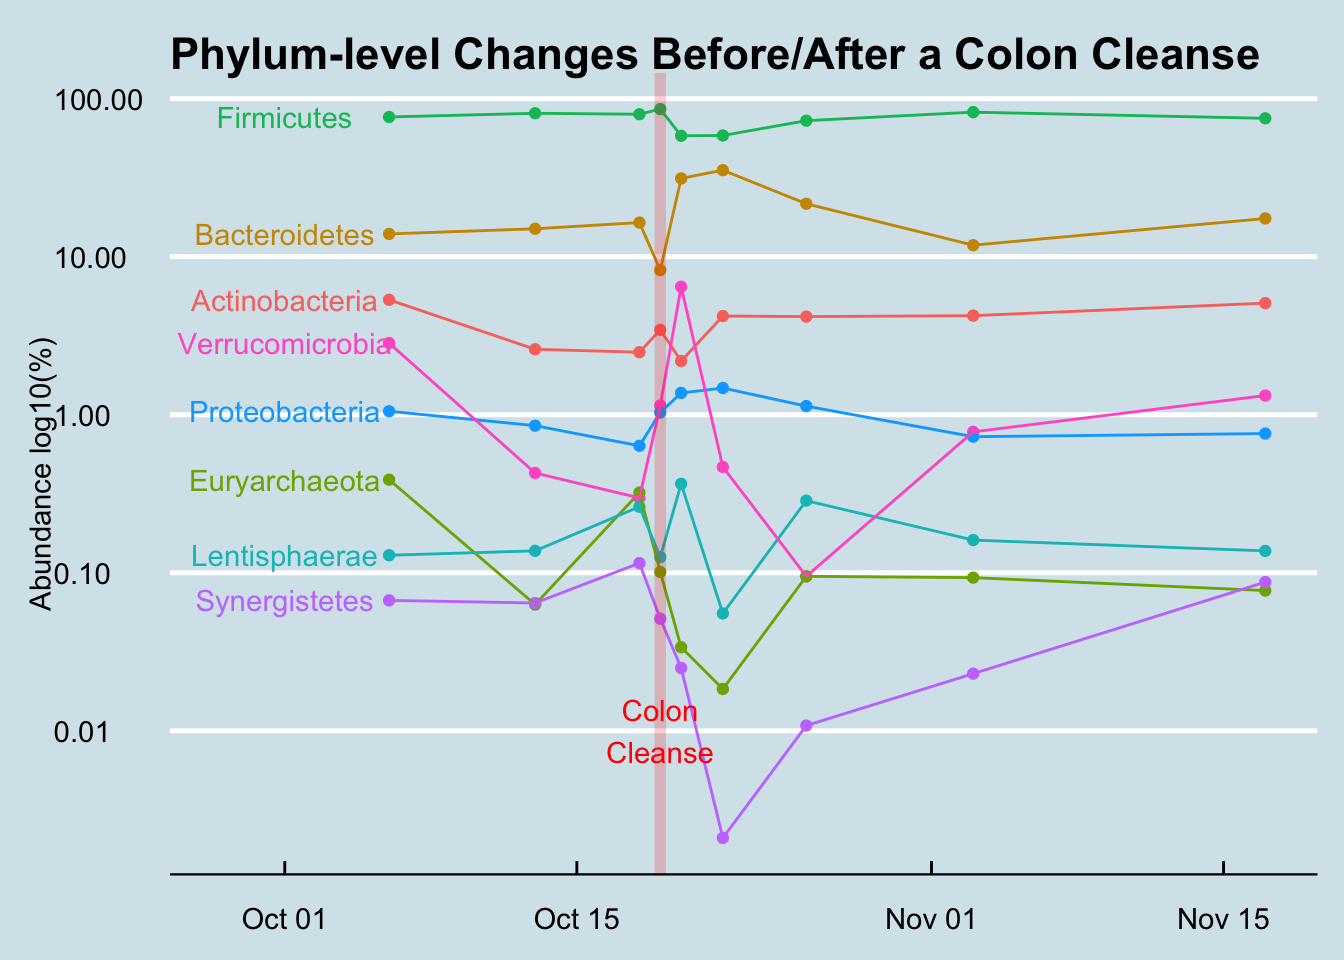 Overall phylum-level summary, from baseline (2 weeks before the cleanse) to CC (colon cleanse) to one month after CC.